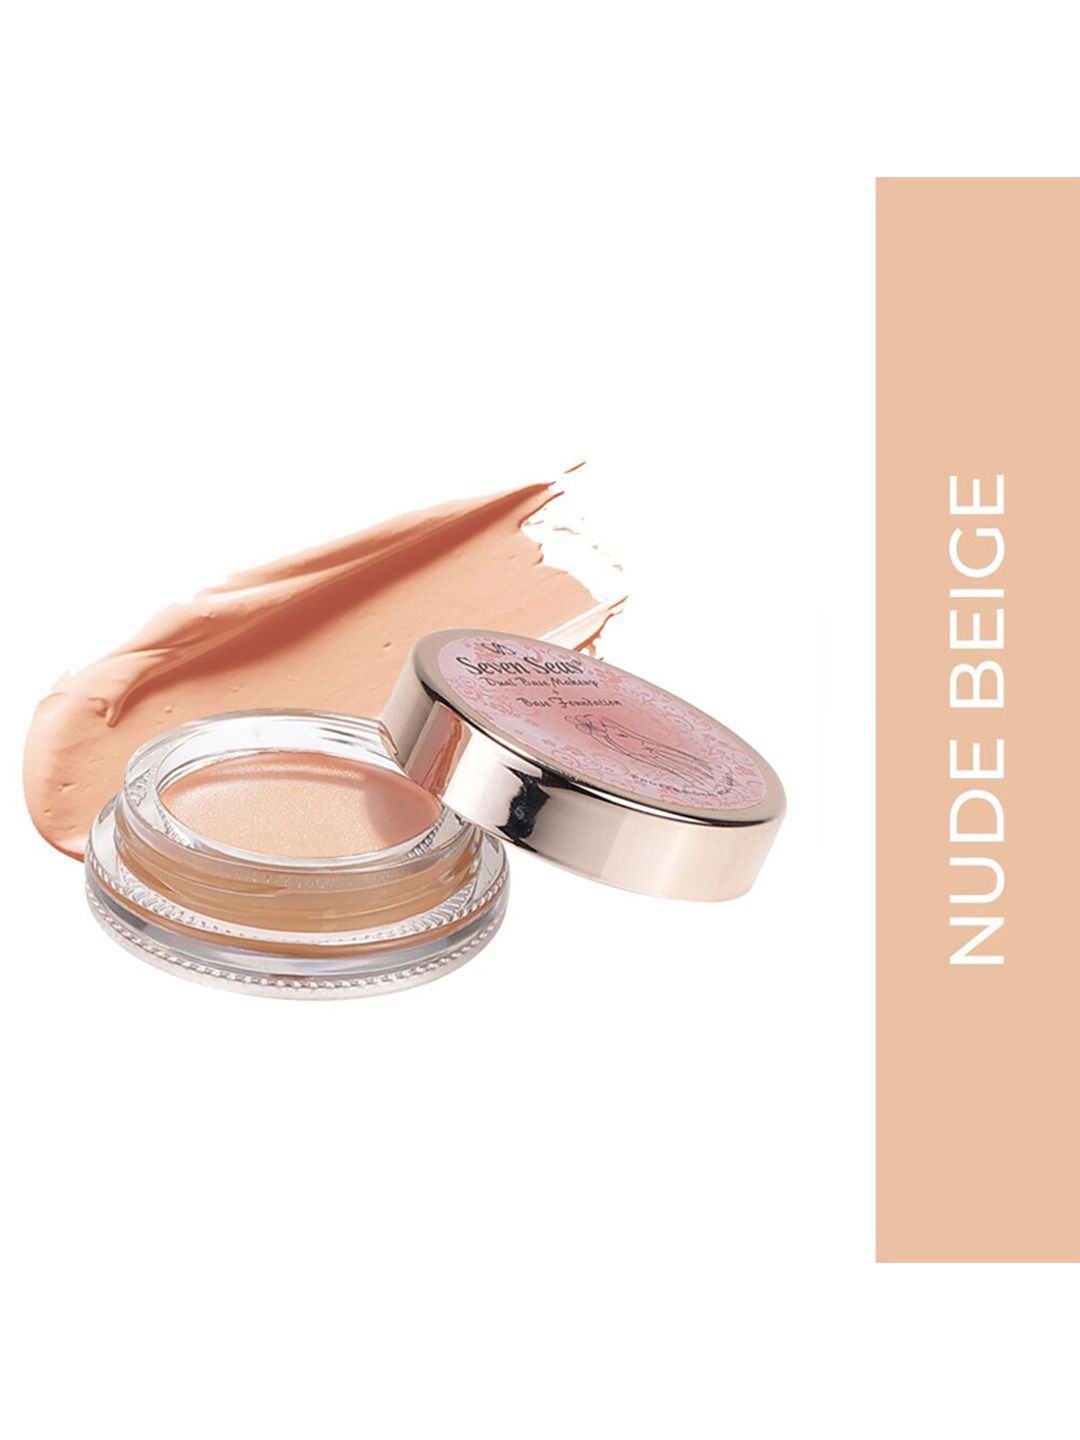 Seven Seas Base Foundation Oil Free - Nude Beige Price in India